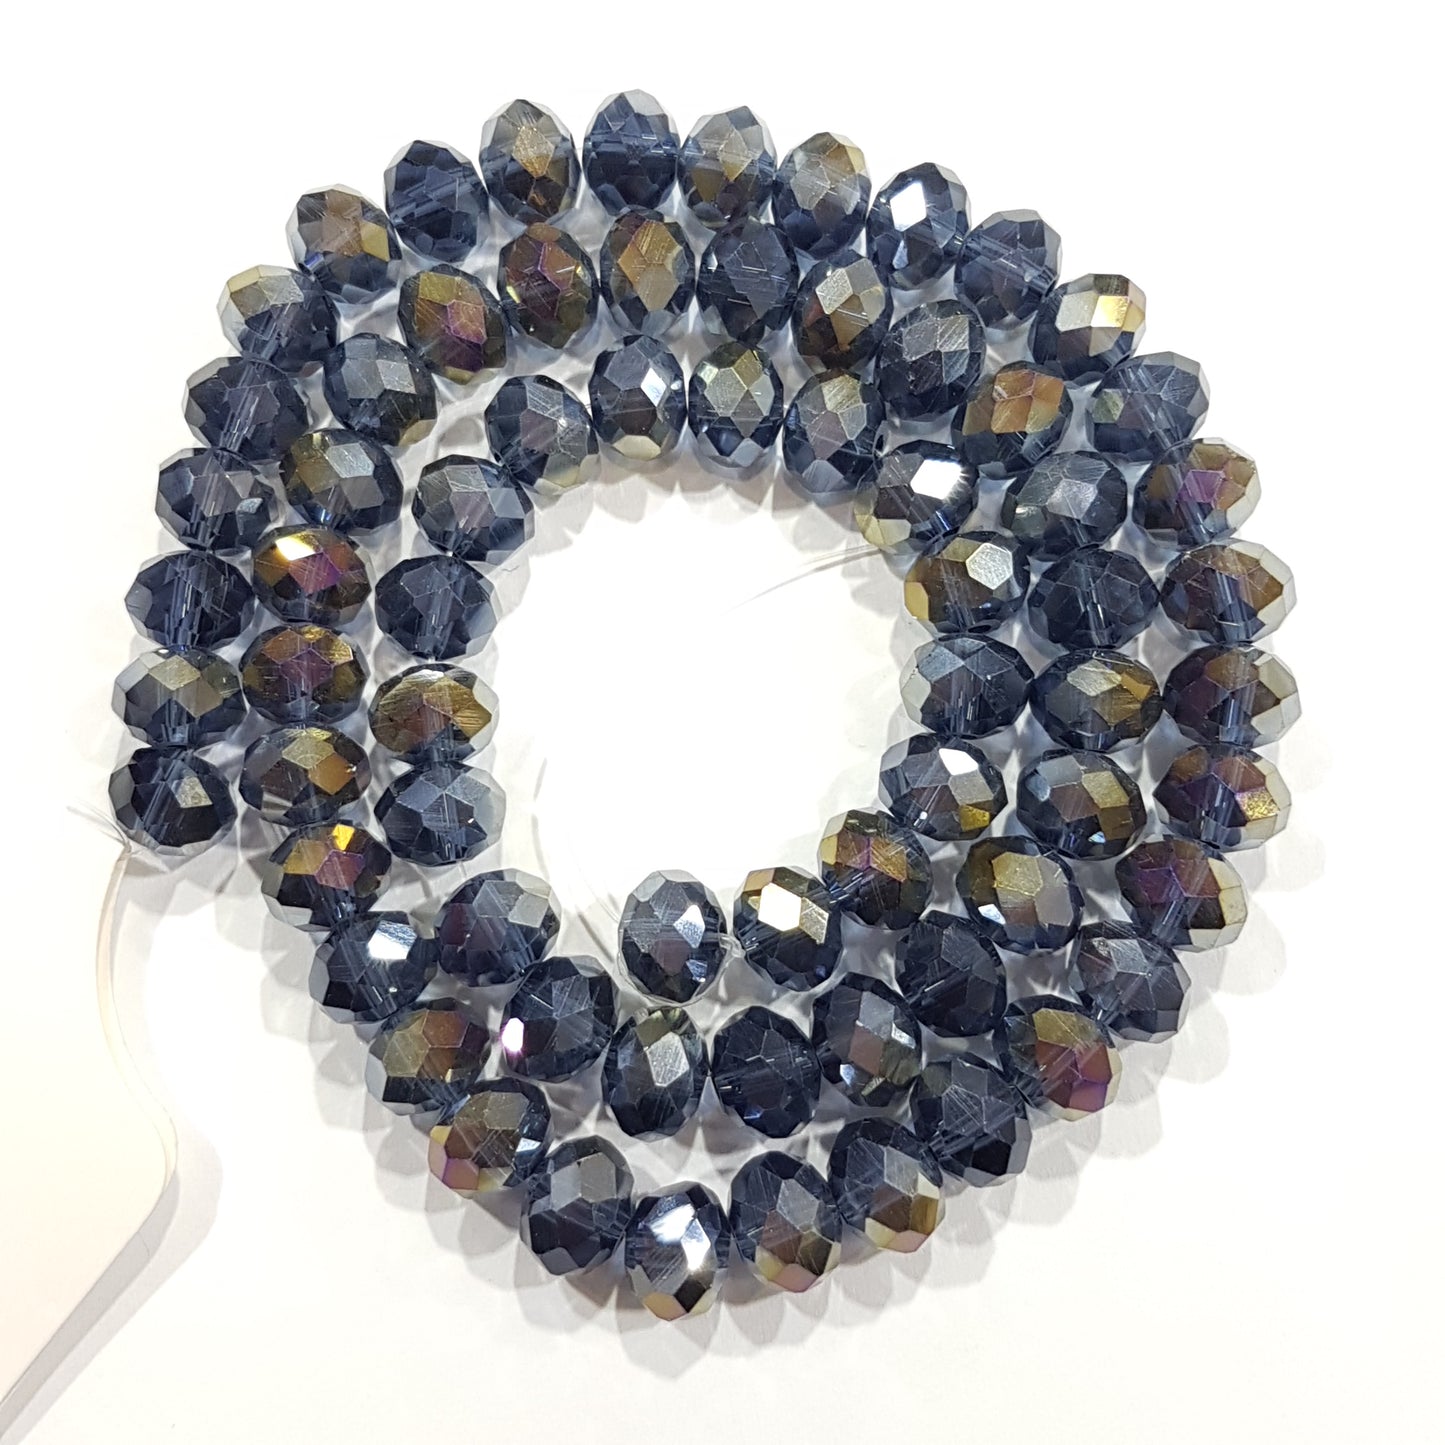 70pc Crystal Rondelle Beads